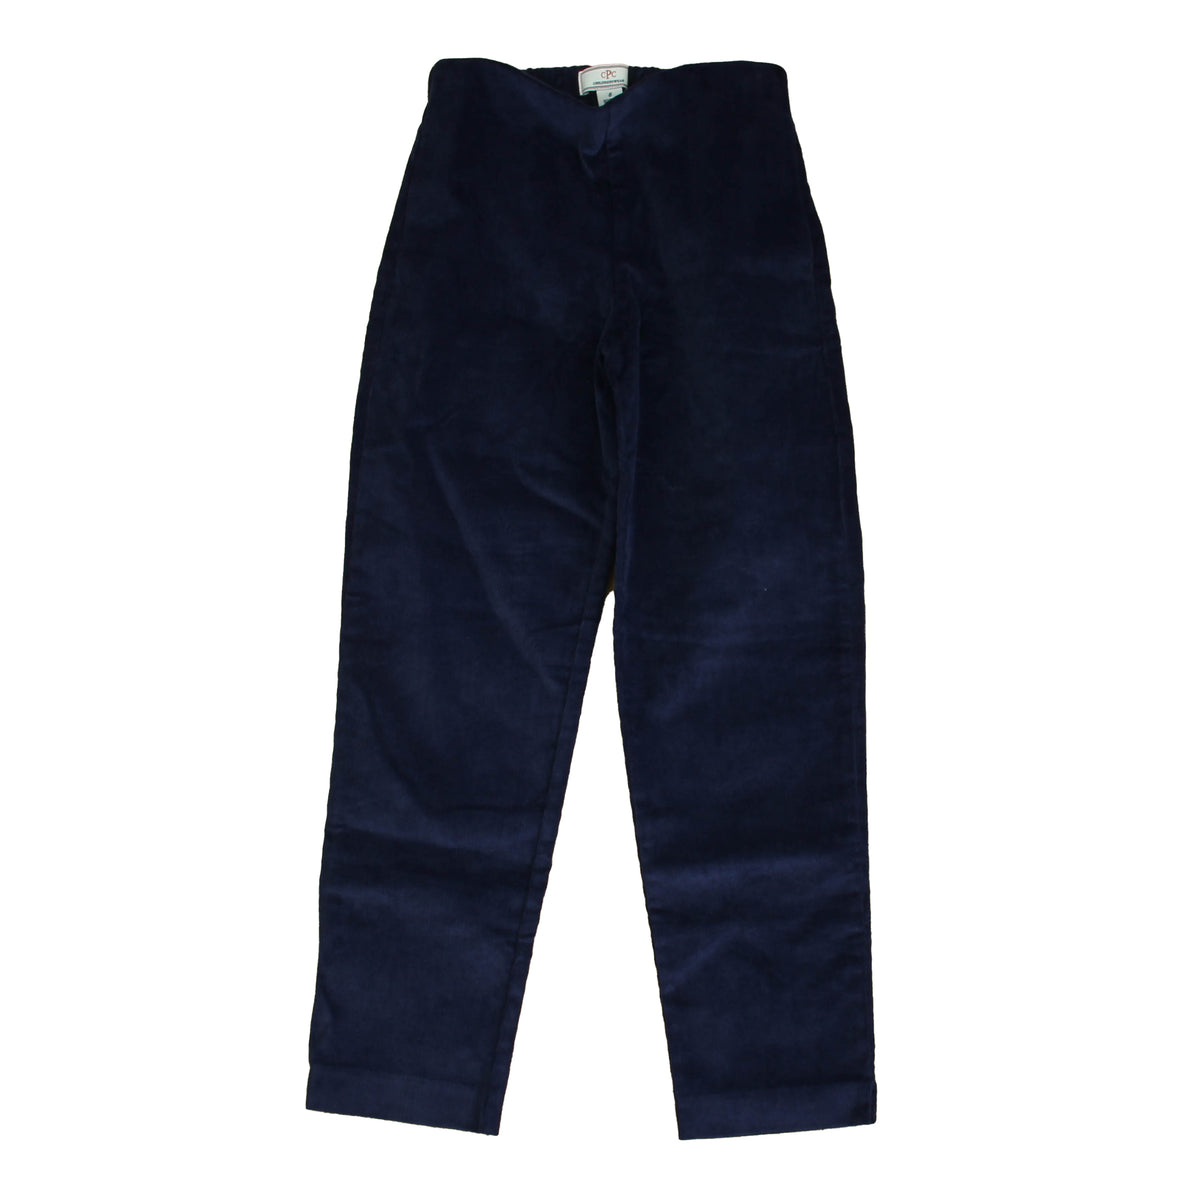 New with Tags: Navy Pants size: 6-14 Years -- FINAL SALE